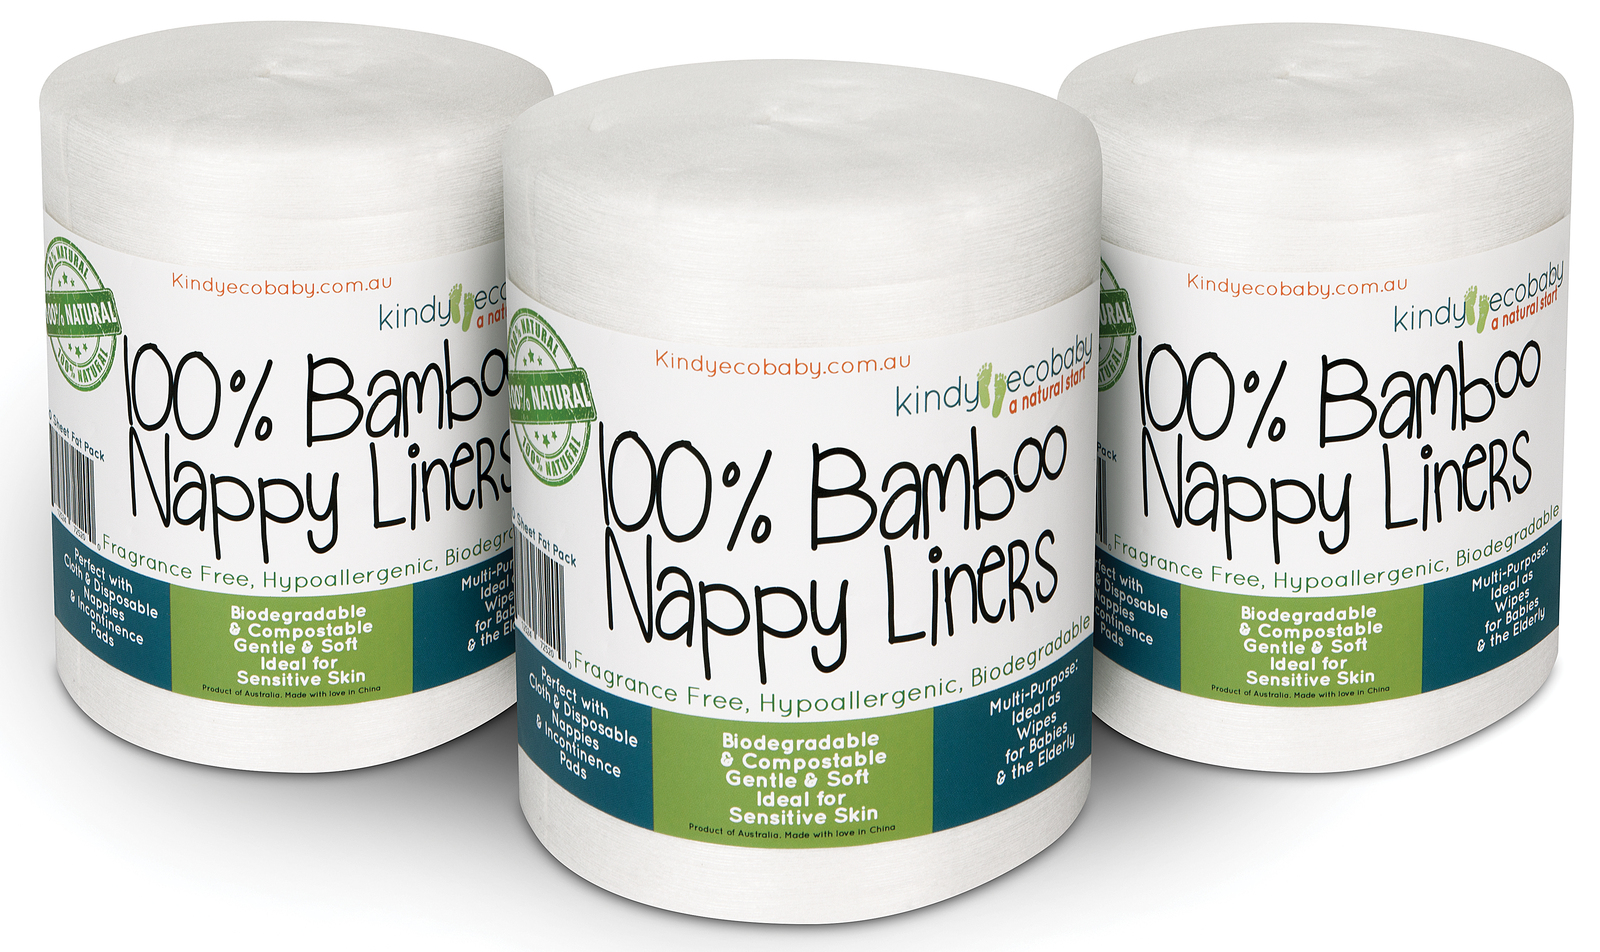 A pack of of three Kindy Ecobaby's bamboo nappy liners, showcasing their natural, eco-friendly, and baby-safe characteristics for responsible and effective diapering